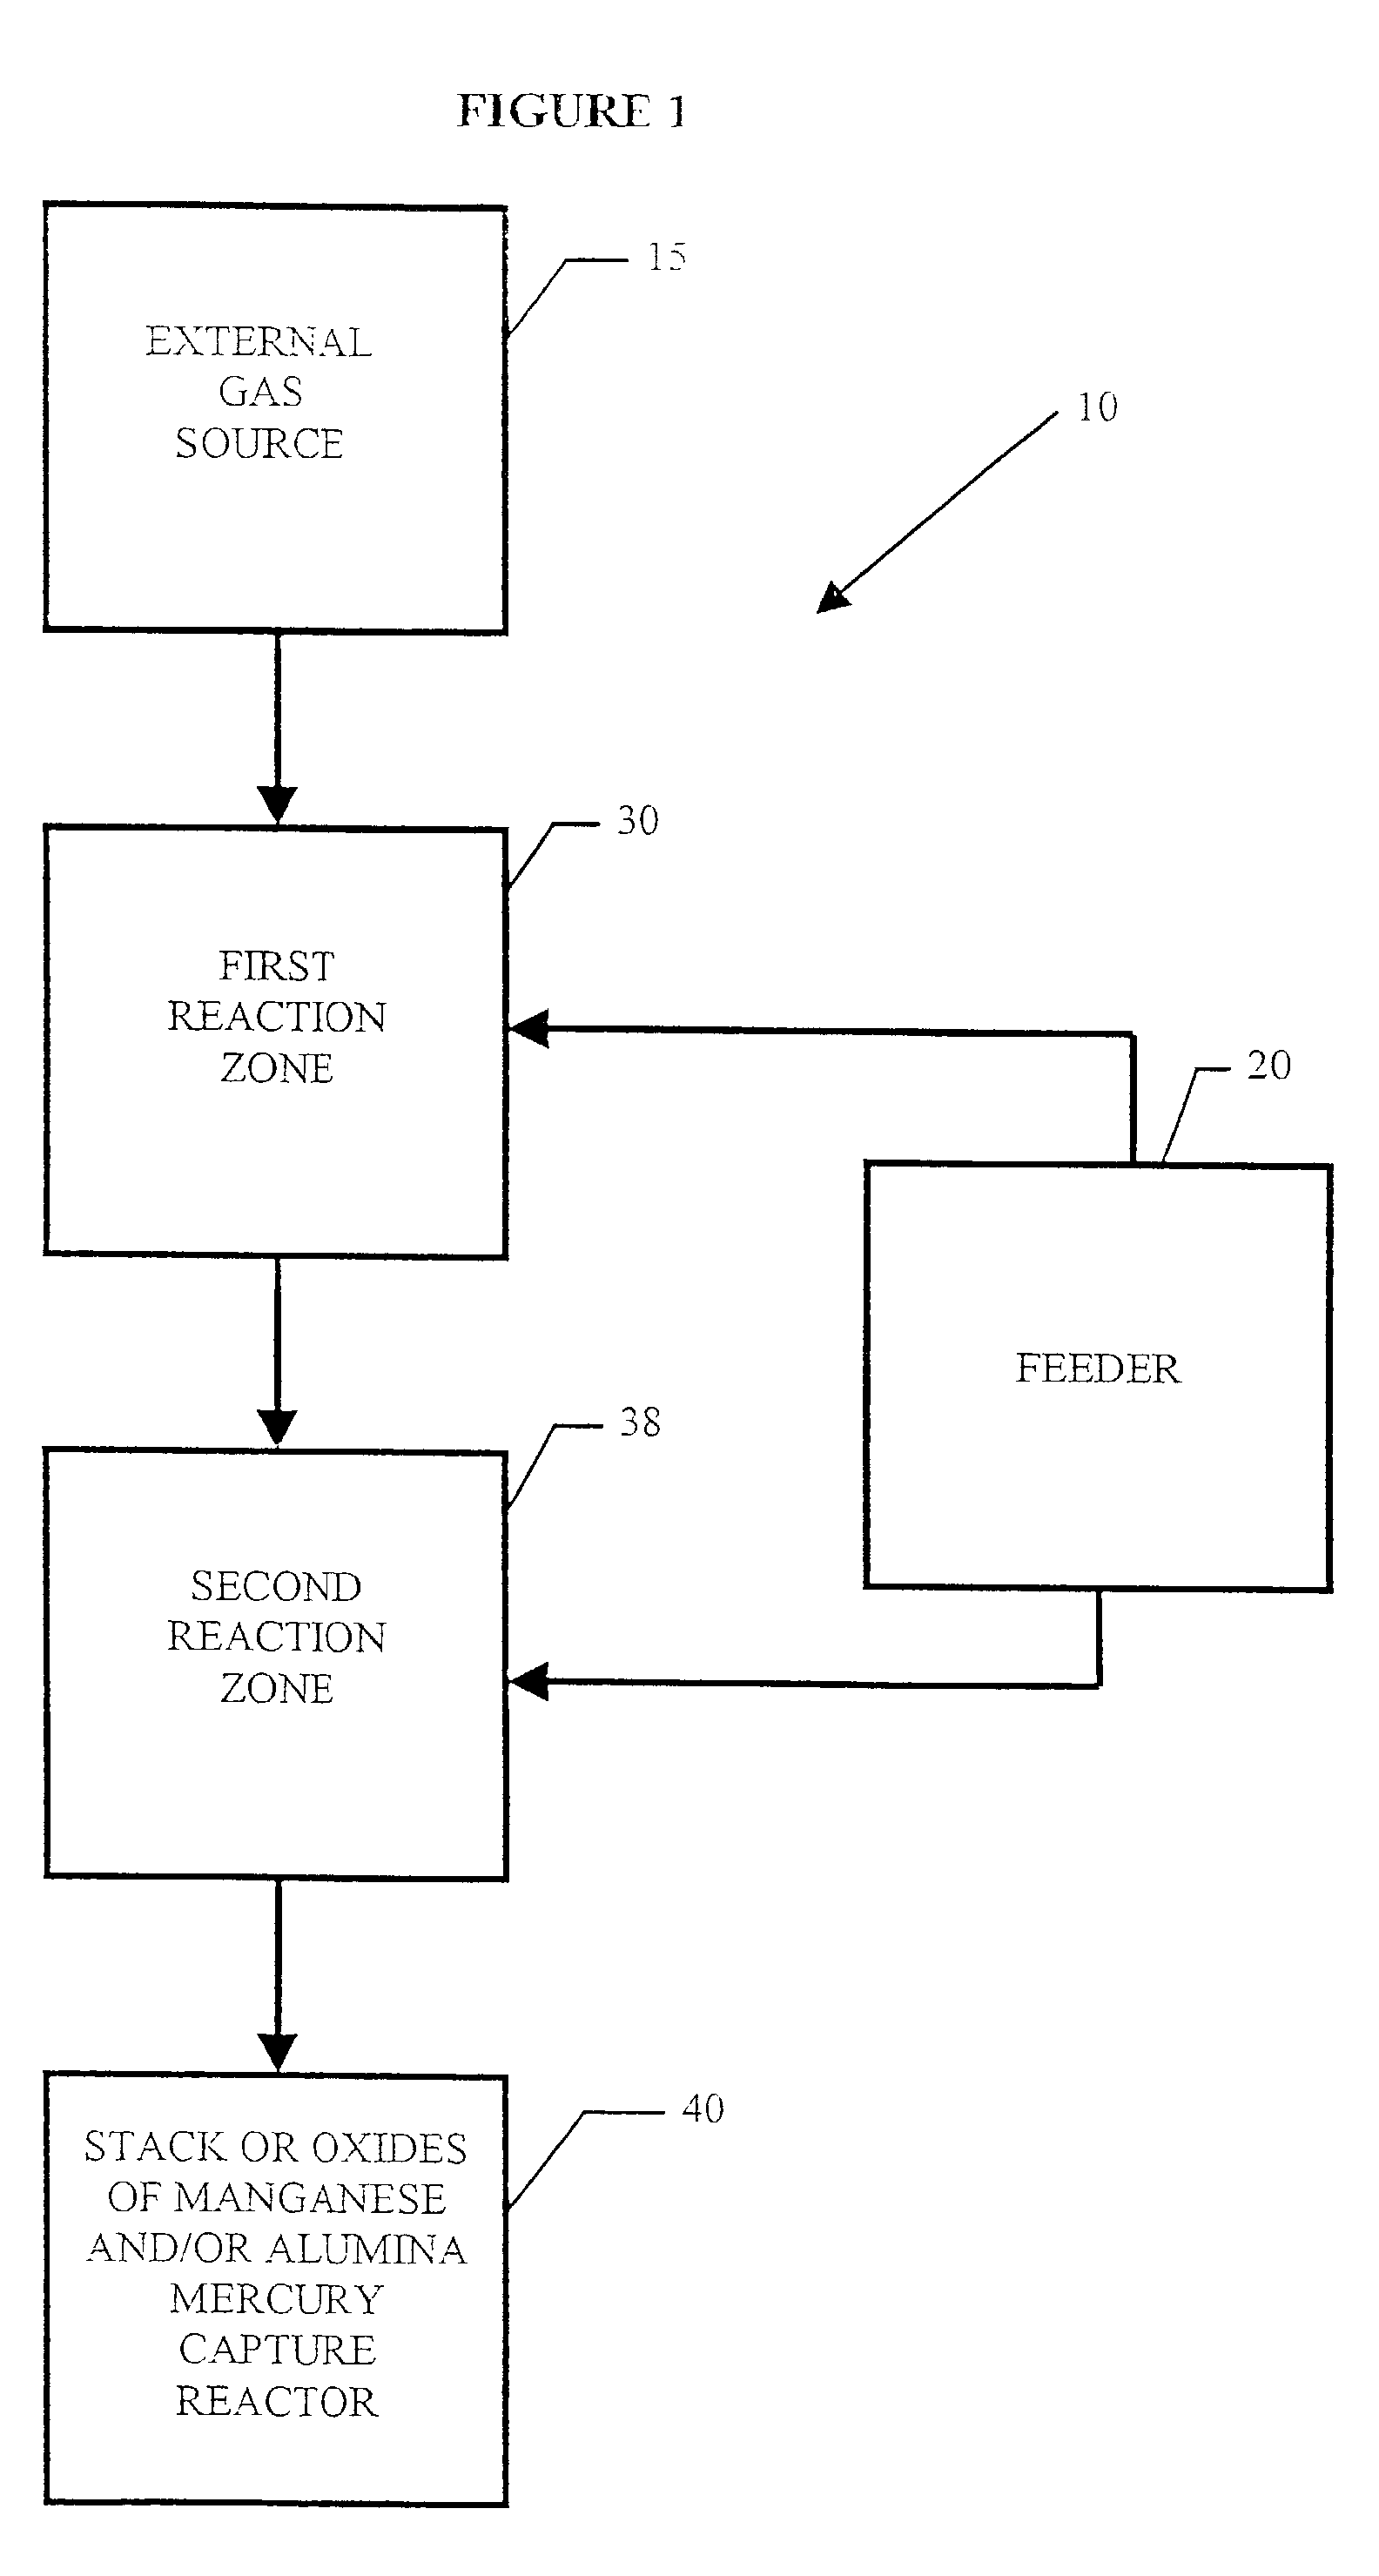 System and process for removal of pollutants from a gas stream